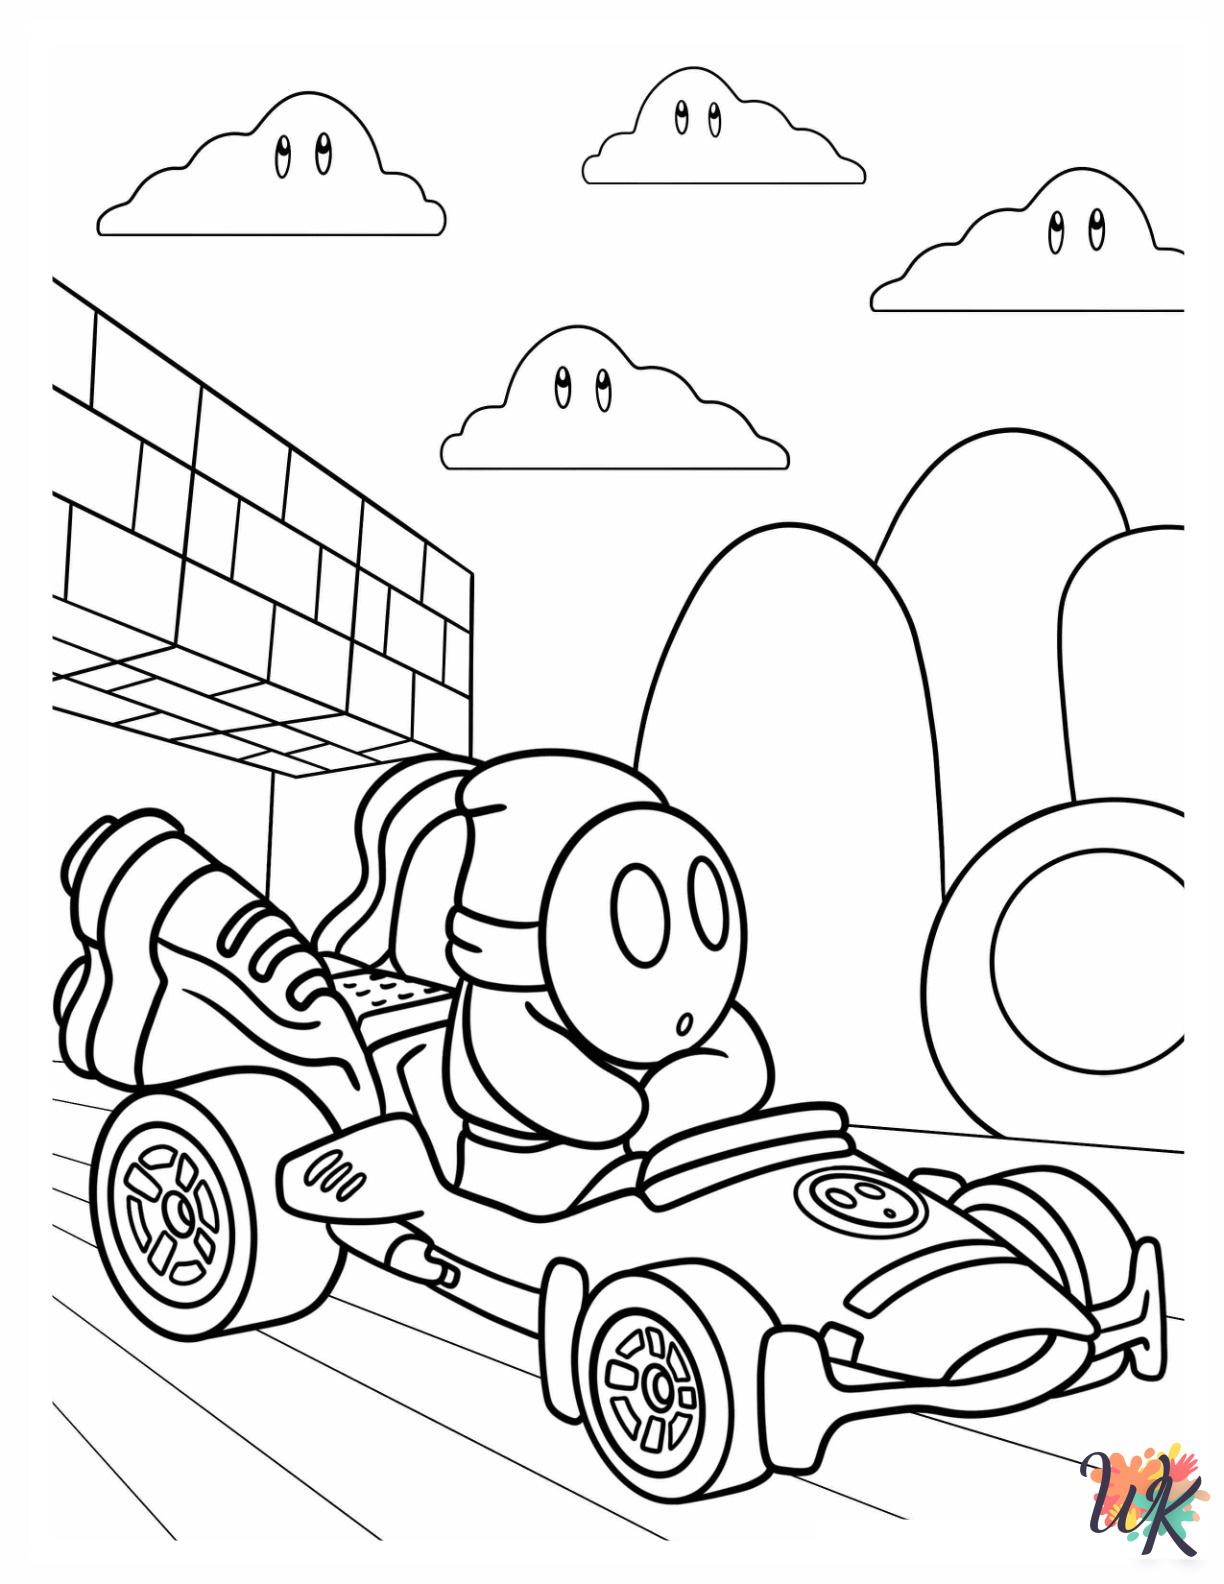 Shy Guy ornament coloring pages 1